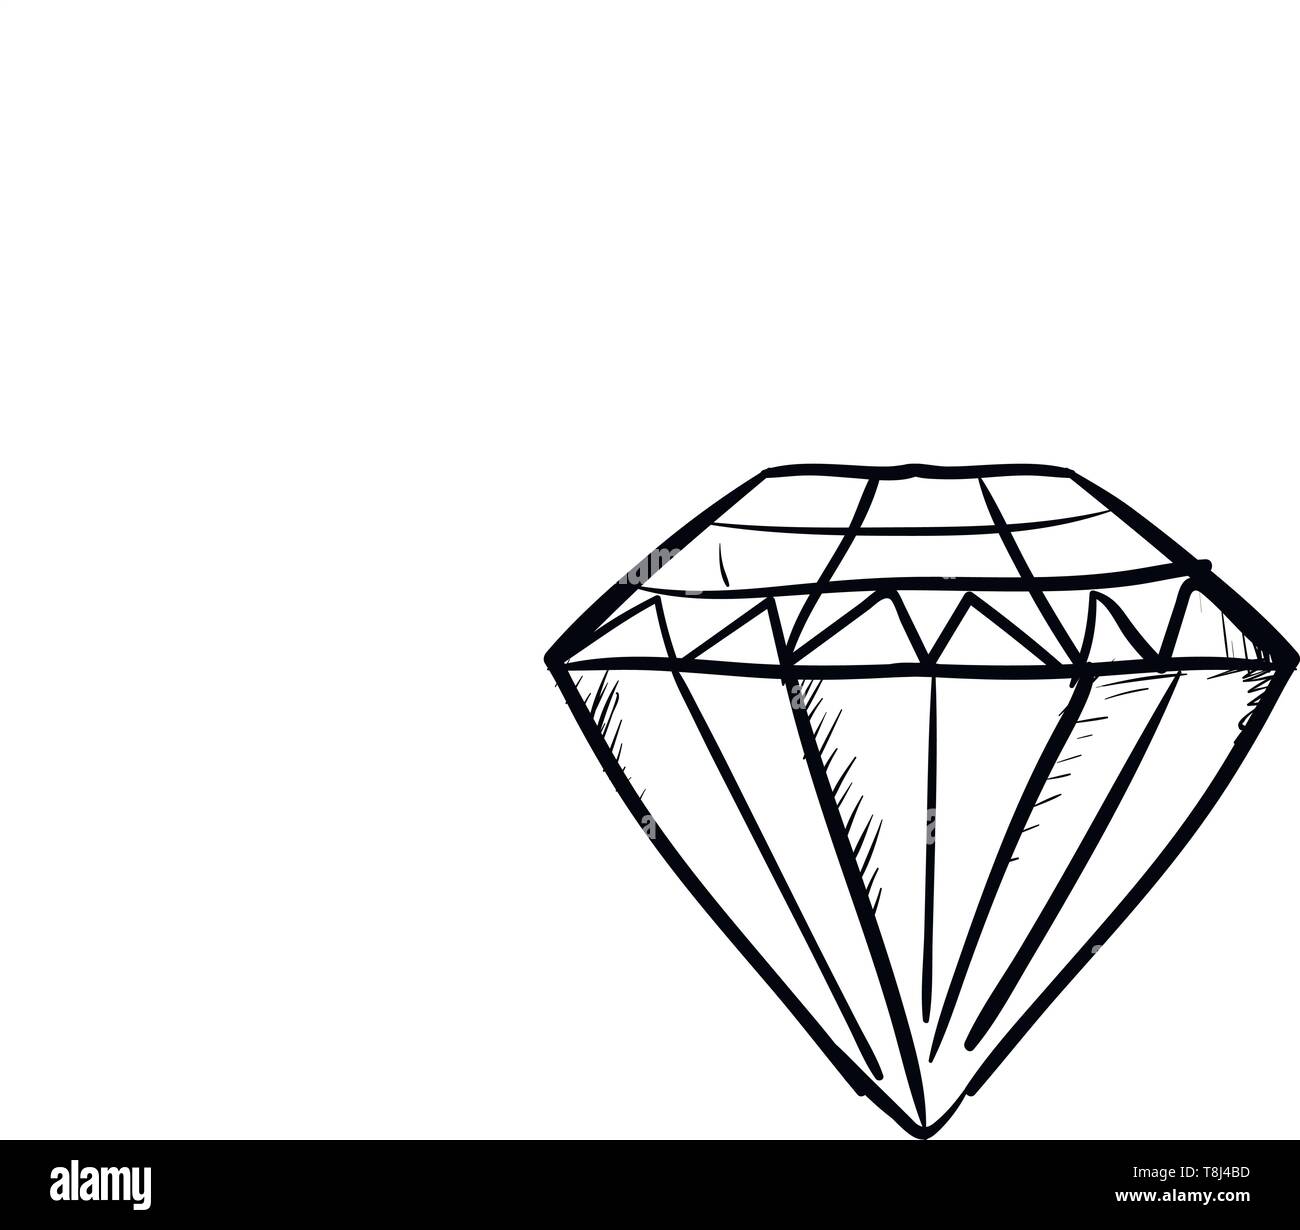 How to Draw a Diamond - Easy Drawing Art